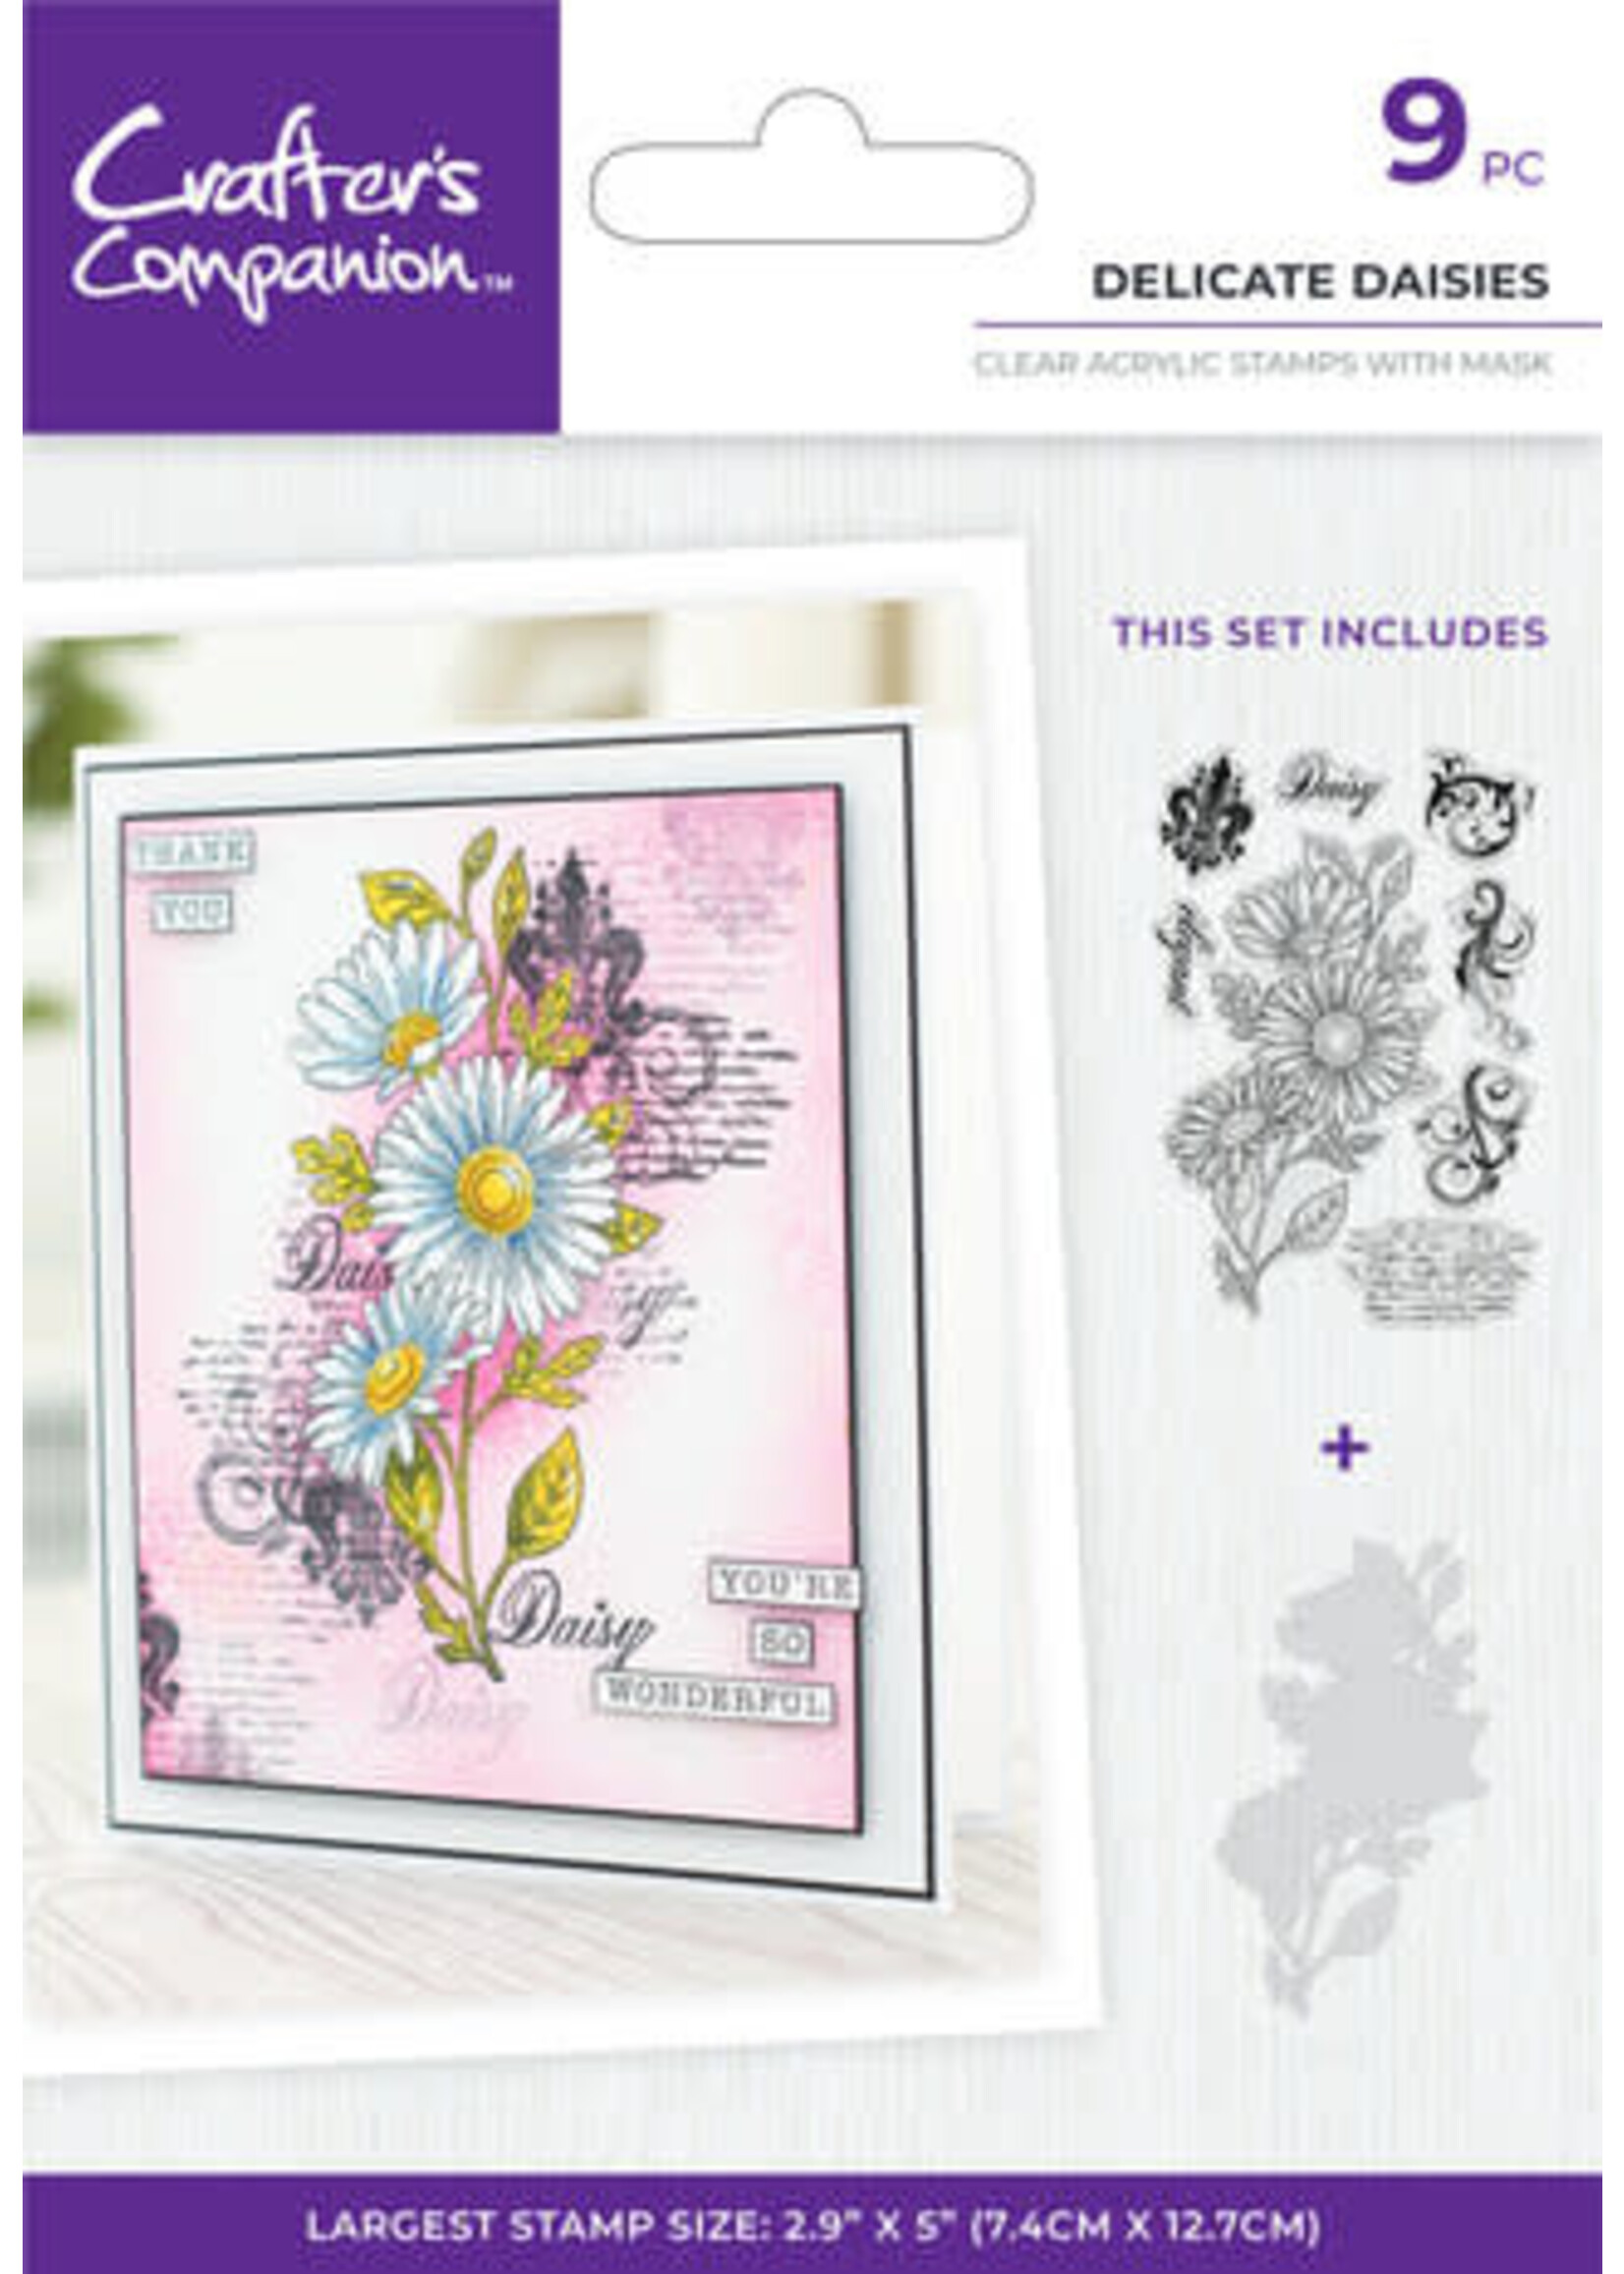 Crafters Companion Floral Collage Clear Stamp w/ Mask 4x6 Inch Delicate Daises (CC-CA-ST-DELDAI)